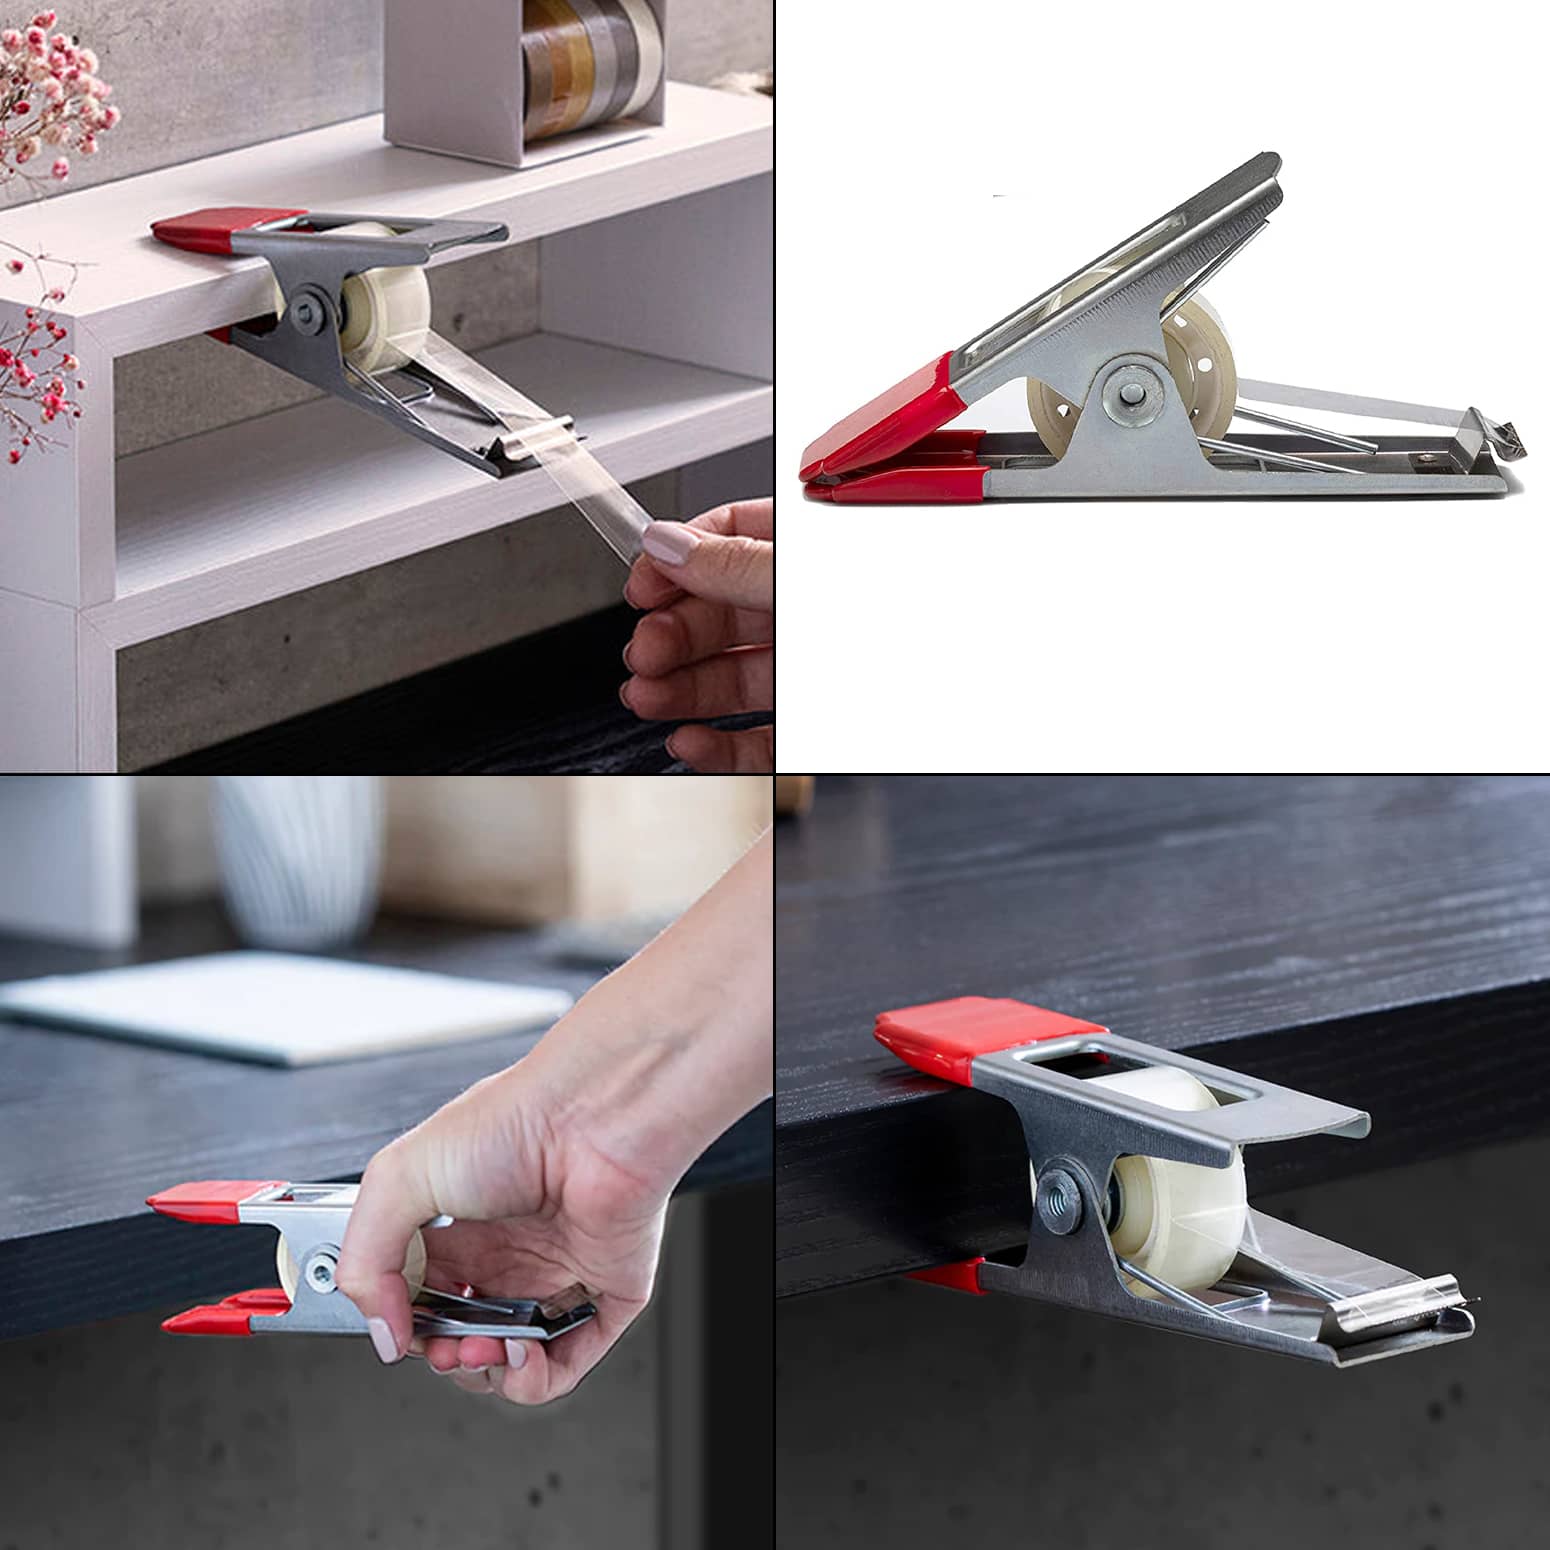 Clamp Tape - One-Handed, Clamp-On Tape Dispenser